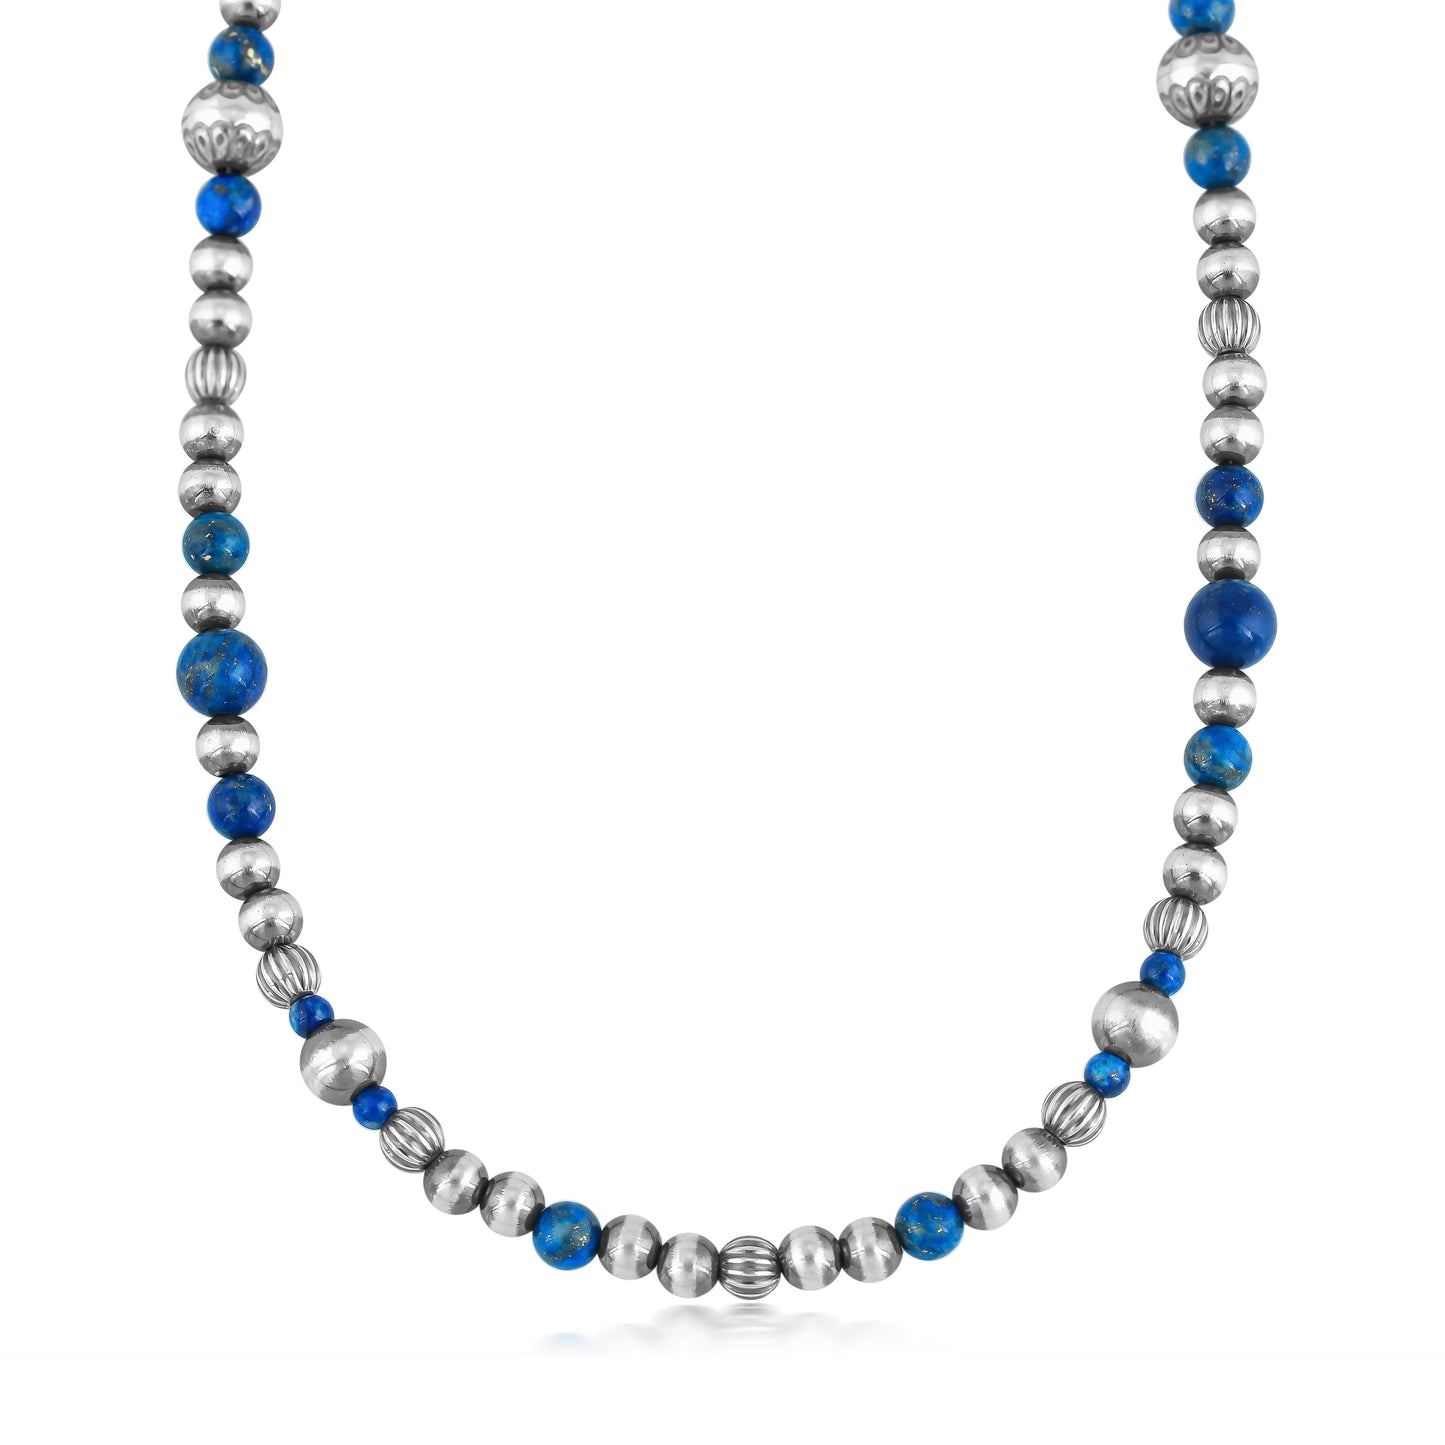 American West Sterling Silver Women's Necklace Genuine Lapis Multi Beaded Design, 17 to 20 Inches